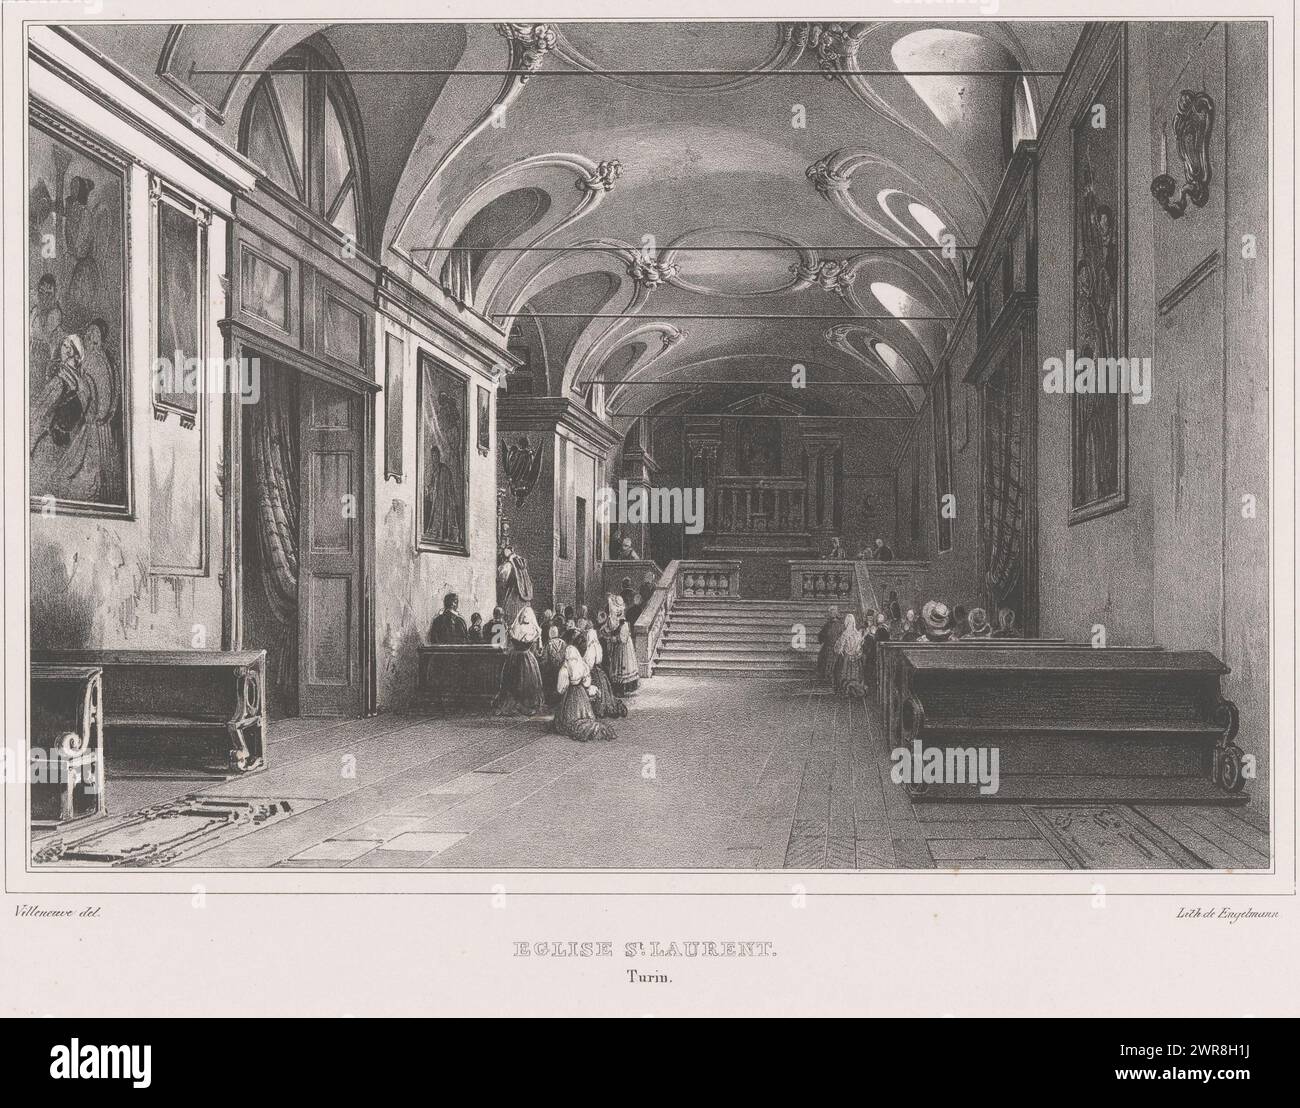 View of the interior of the Chiesa di San Lorenzo in Turin, Eglise St Laurent (title on object), Views in Turin (series title), Turin (series title on object), Numbered top right: 9., print maker: Louis Jules Fréderic Villeneuve, printer: Gottfried Engelmann, Paris, 1829 - 1839, paper, height 310 mm × width 476 mm, print Stock Photo